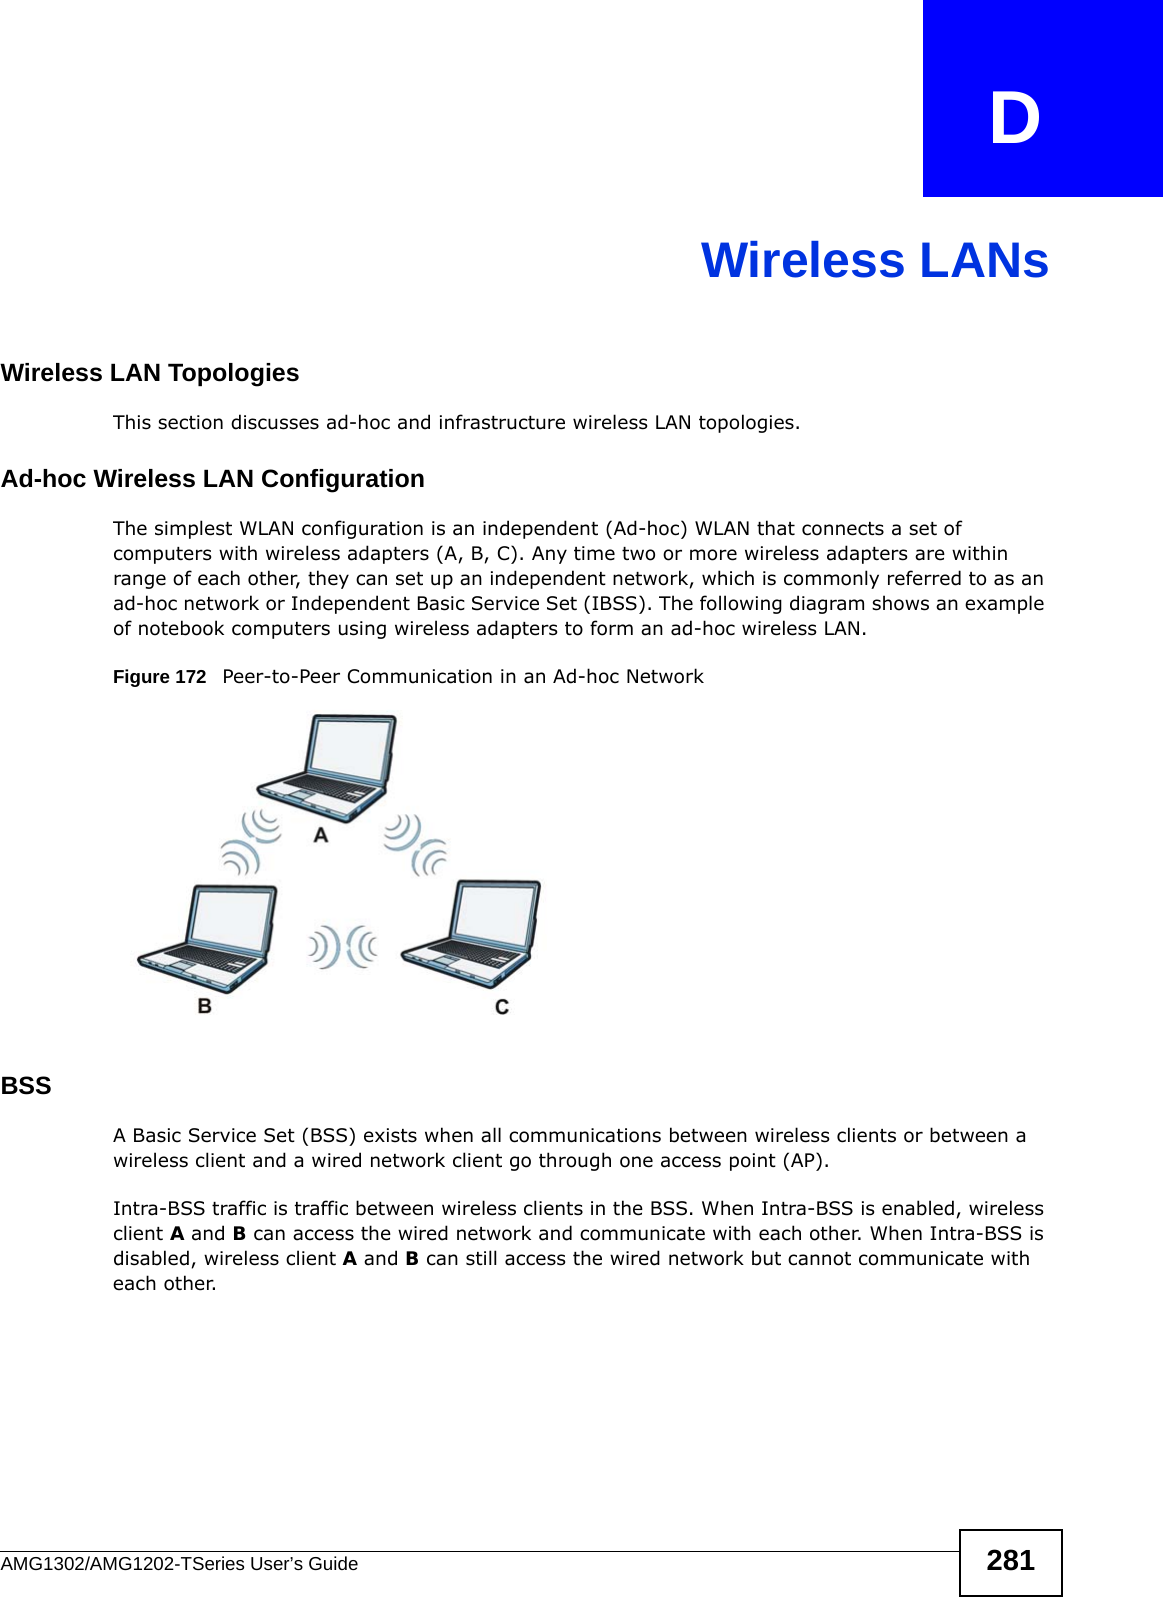 AMG1302/AMG1202-TSeries User’s Guide 281APPENDIX   DWireless LANsWireless LAN TopologiesThis section discusses ad-hoc and infrastructure wireless LAN topologies.Ad-hoc Wireless LAN ConfigurationThe simplest WLAN configuration is an independent (Ad-hoc) WLAN that connects a set of computers with wireless adapters (A, B, C). Any time two or more wireless adapters are within range of each other, they can set up an independent network, which is commonly referred to as an ad-hoc network or Independent Basic Service Set (IBSS). The following diagram shows an example of notebook computers using wireless adapters to form an ad-hoc wireless LAN. Figure 172   Peer-to-Peer Communication in an Ad-hoc NetworkBSSA Basic Service Set (BSS) exists when all communications between wireless clients or between a wireless client and a wired network client go through one access point (AP). Intra-BSS traffic is traffic between wireless clients in the BSS. When Intra-BSS is enabled, wireless client A and B can access the wired network and communicate with each other. When Intra-BSS is disabled, wireless client A and B can still access the wired network but cannot communicate with each other.